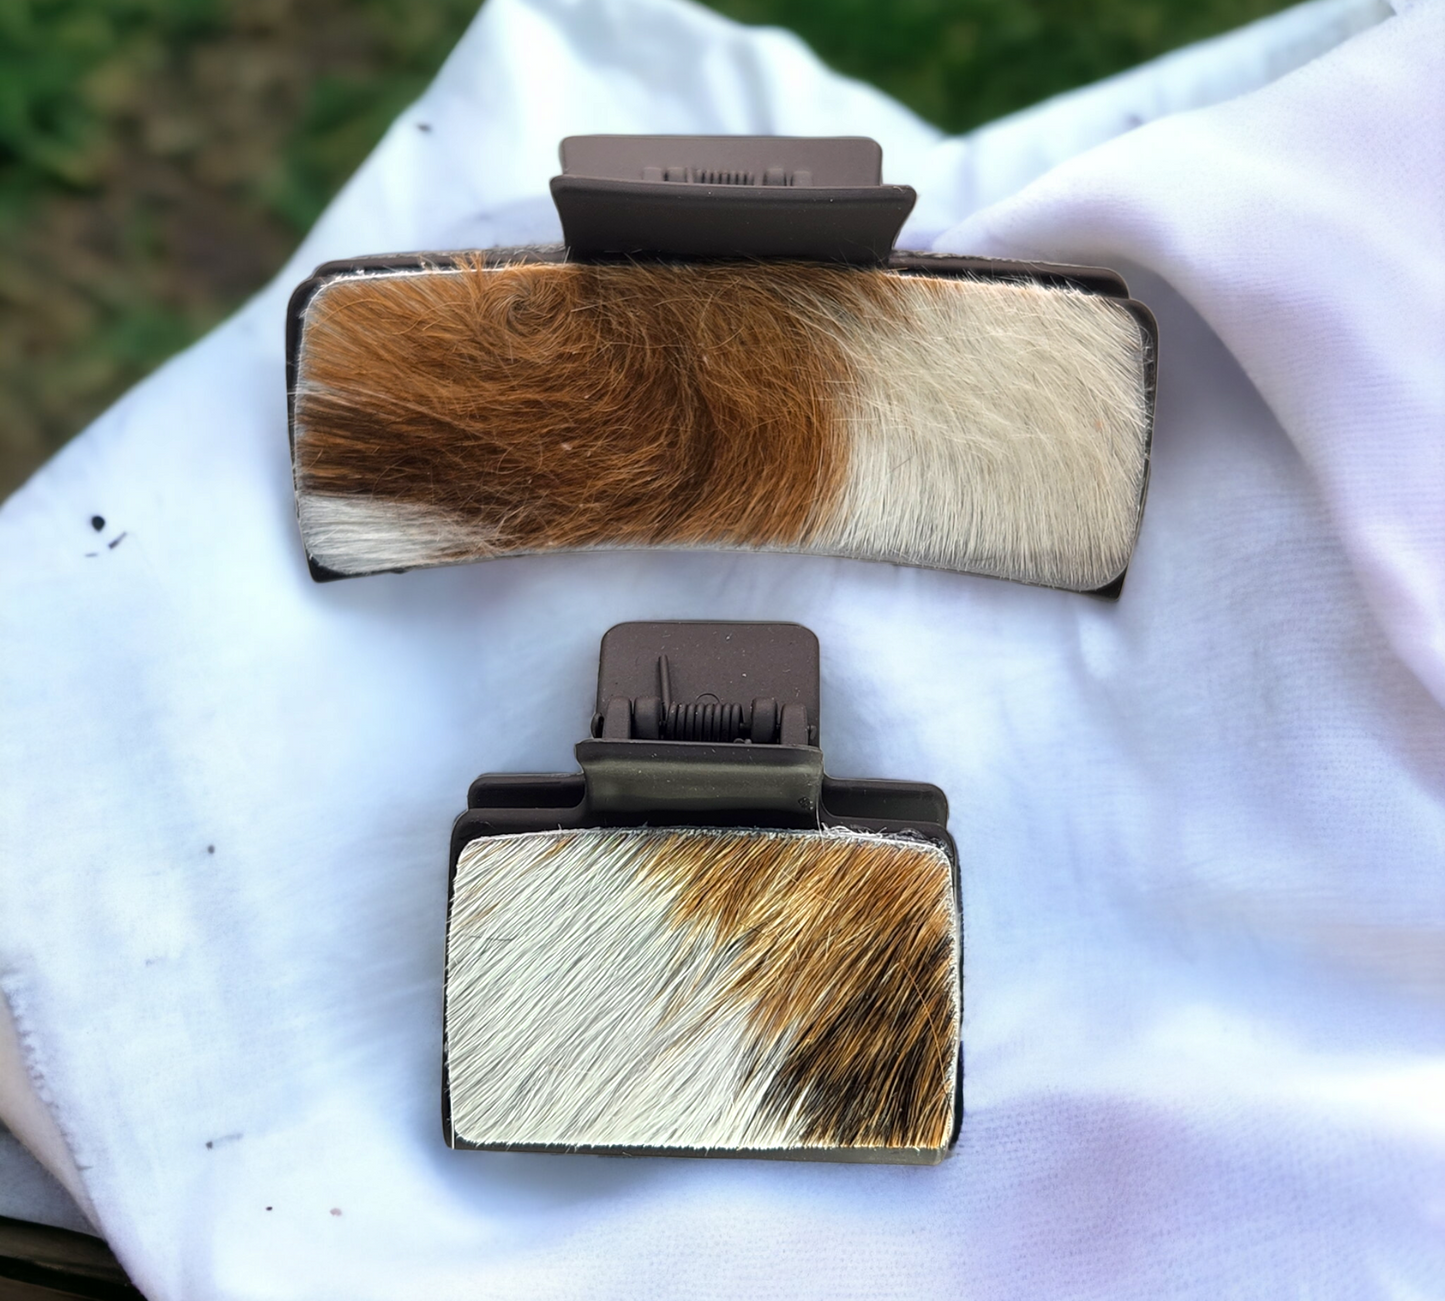 White and Brown leather on Mocha colored hair clip